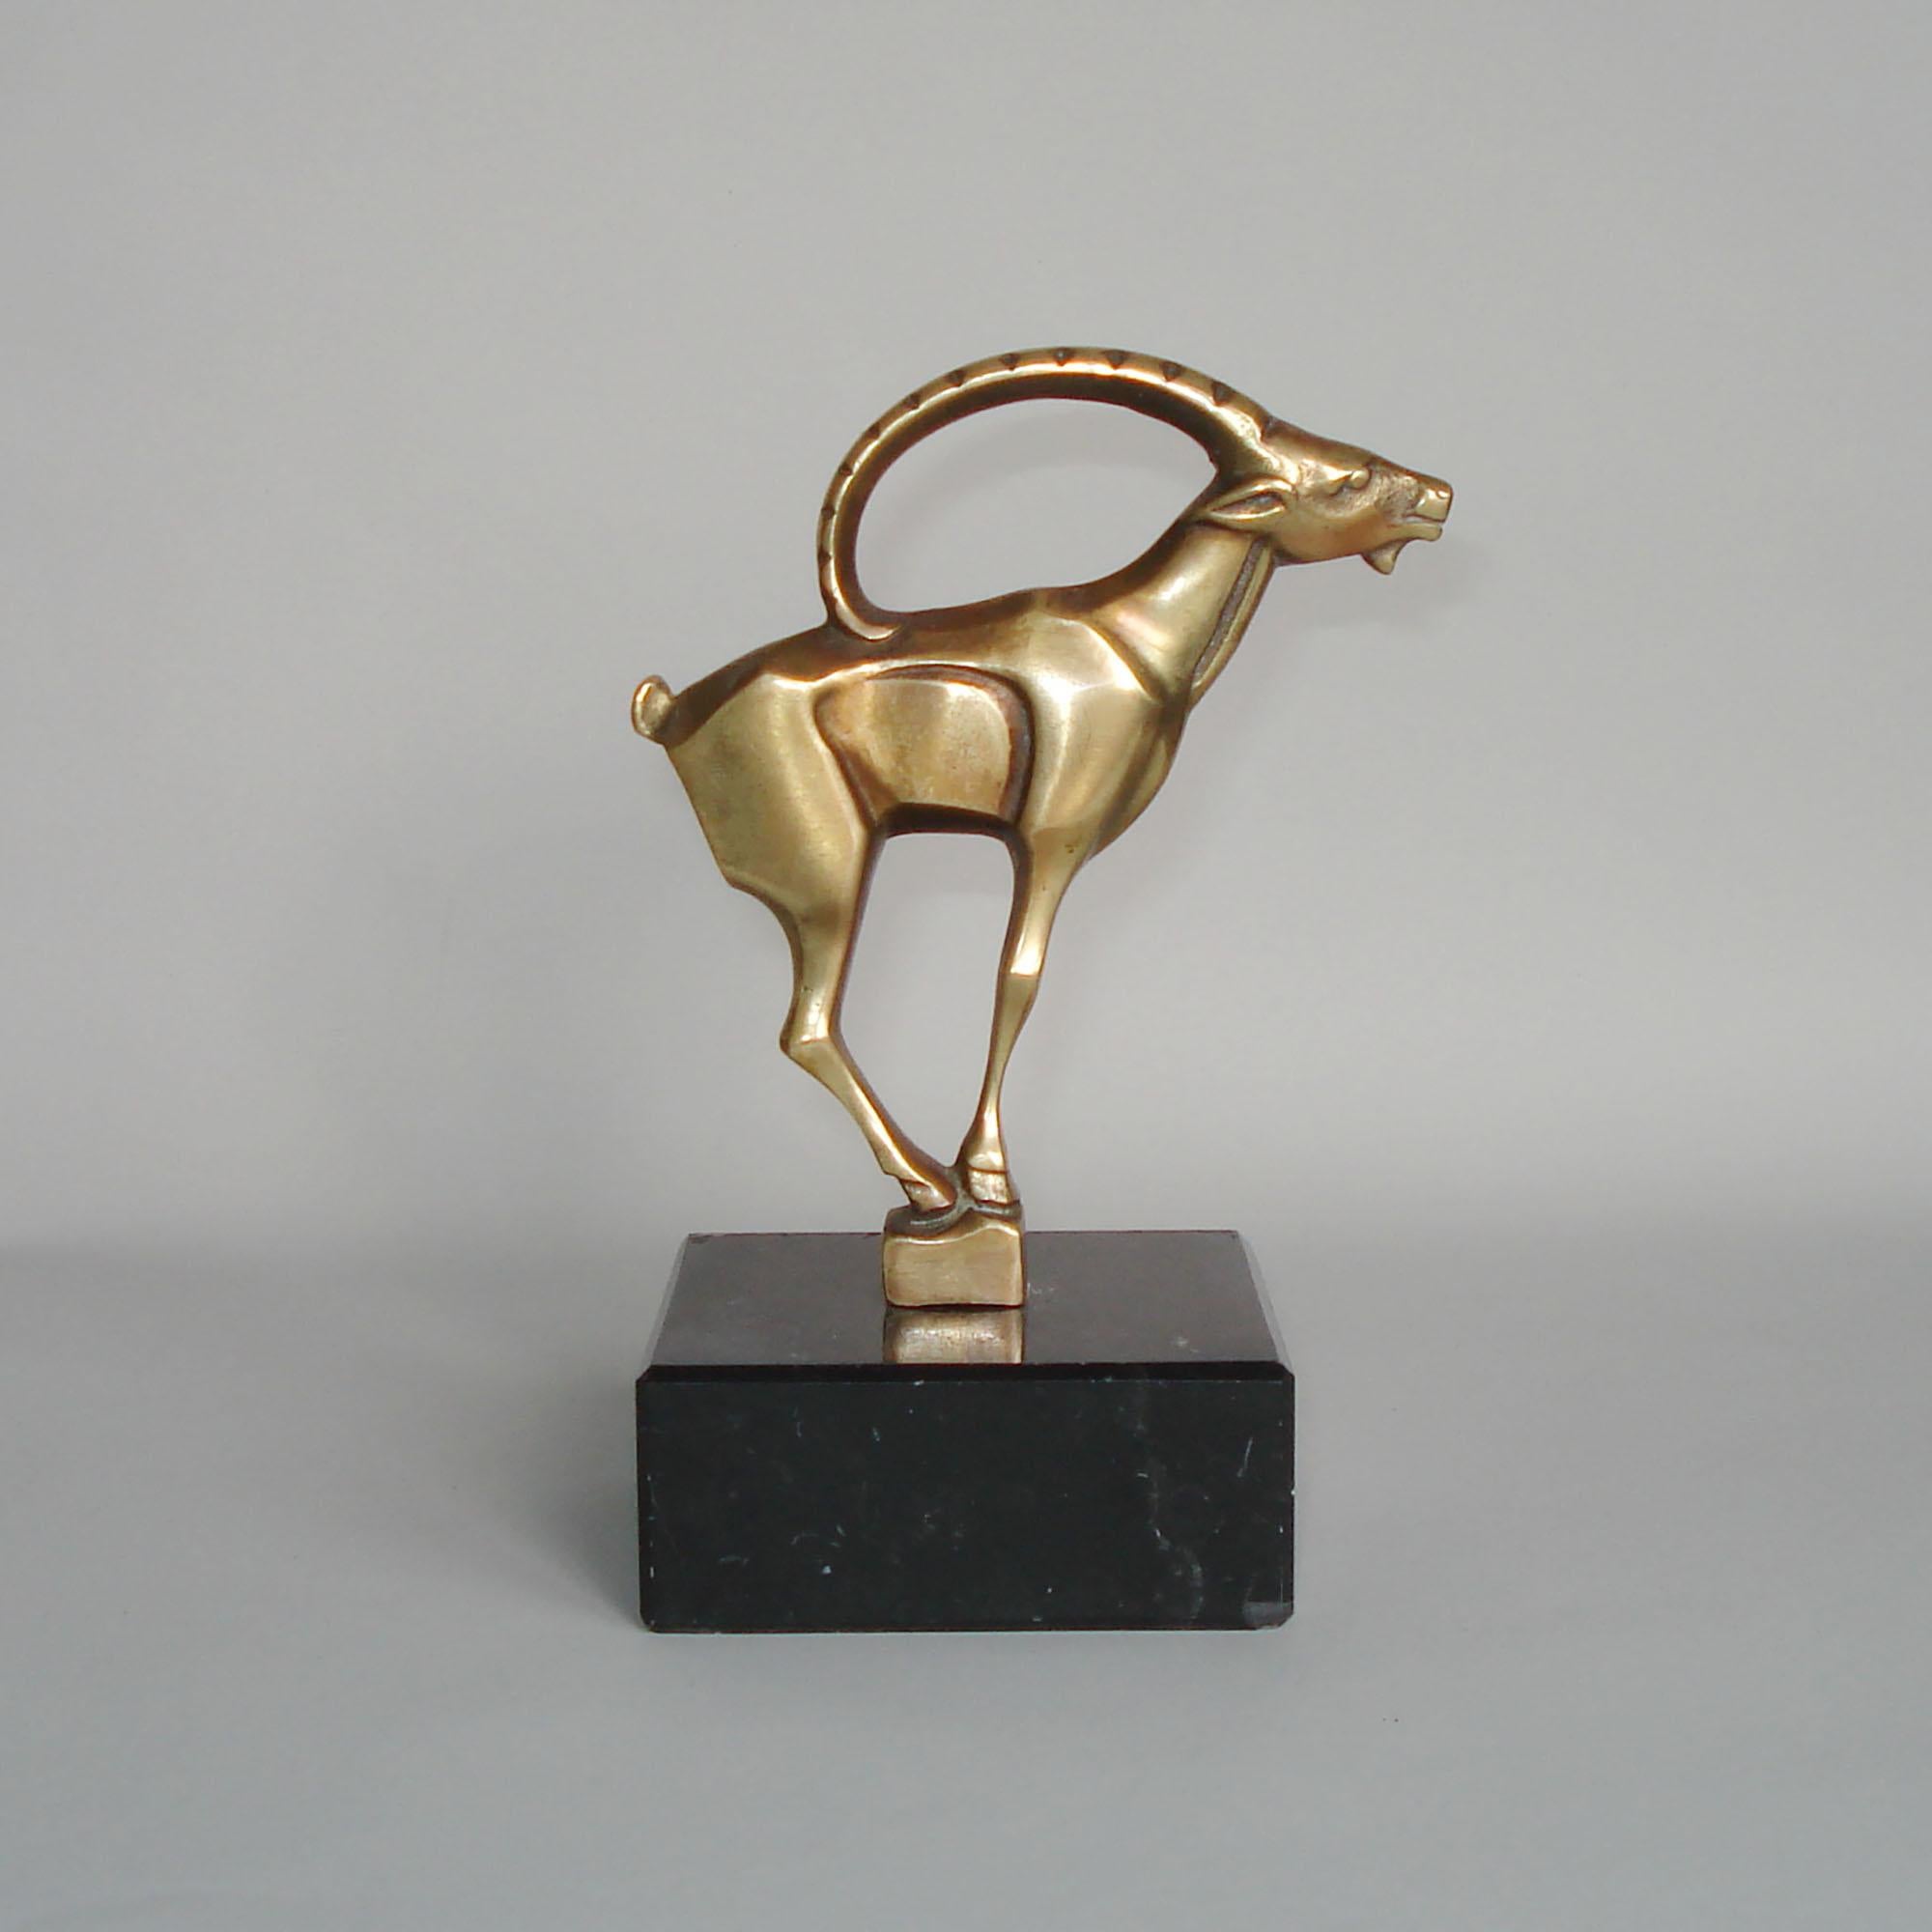 Beautiful Art Deco bronze figurine depicting an ibex, Capricorn, goat, designed by Jan Johannes Bosma (1879-1960), The Netherlands, circa 1925.
Golden patinated bronze on black marble, beautiful original condition, some wear of time, few scratches